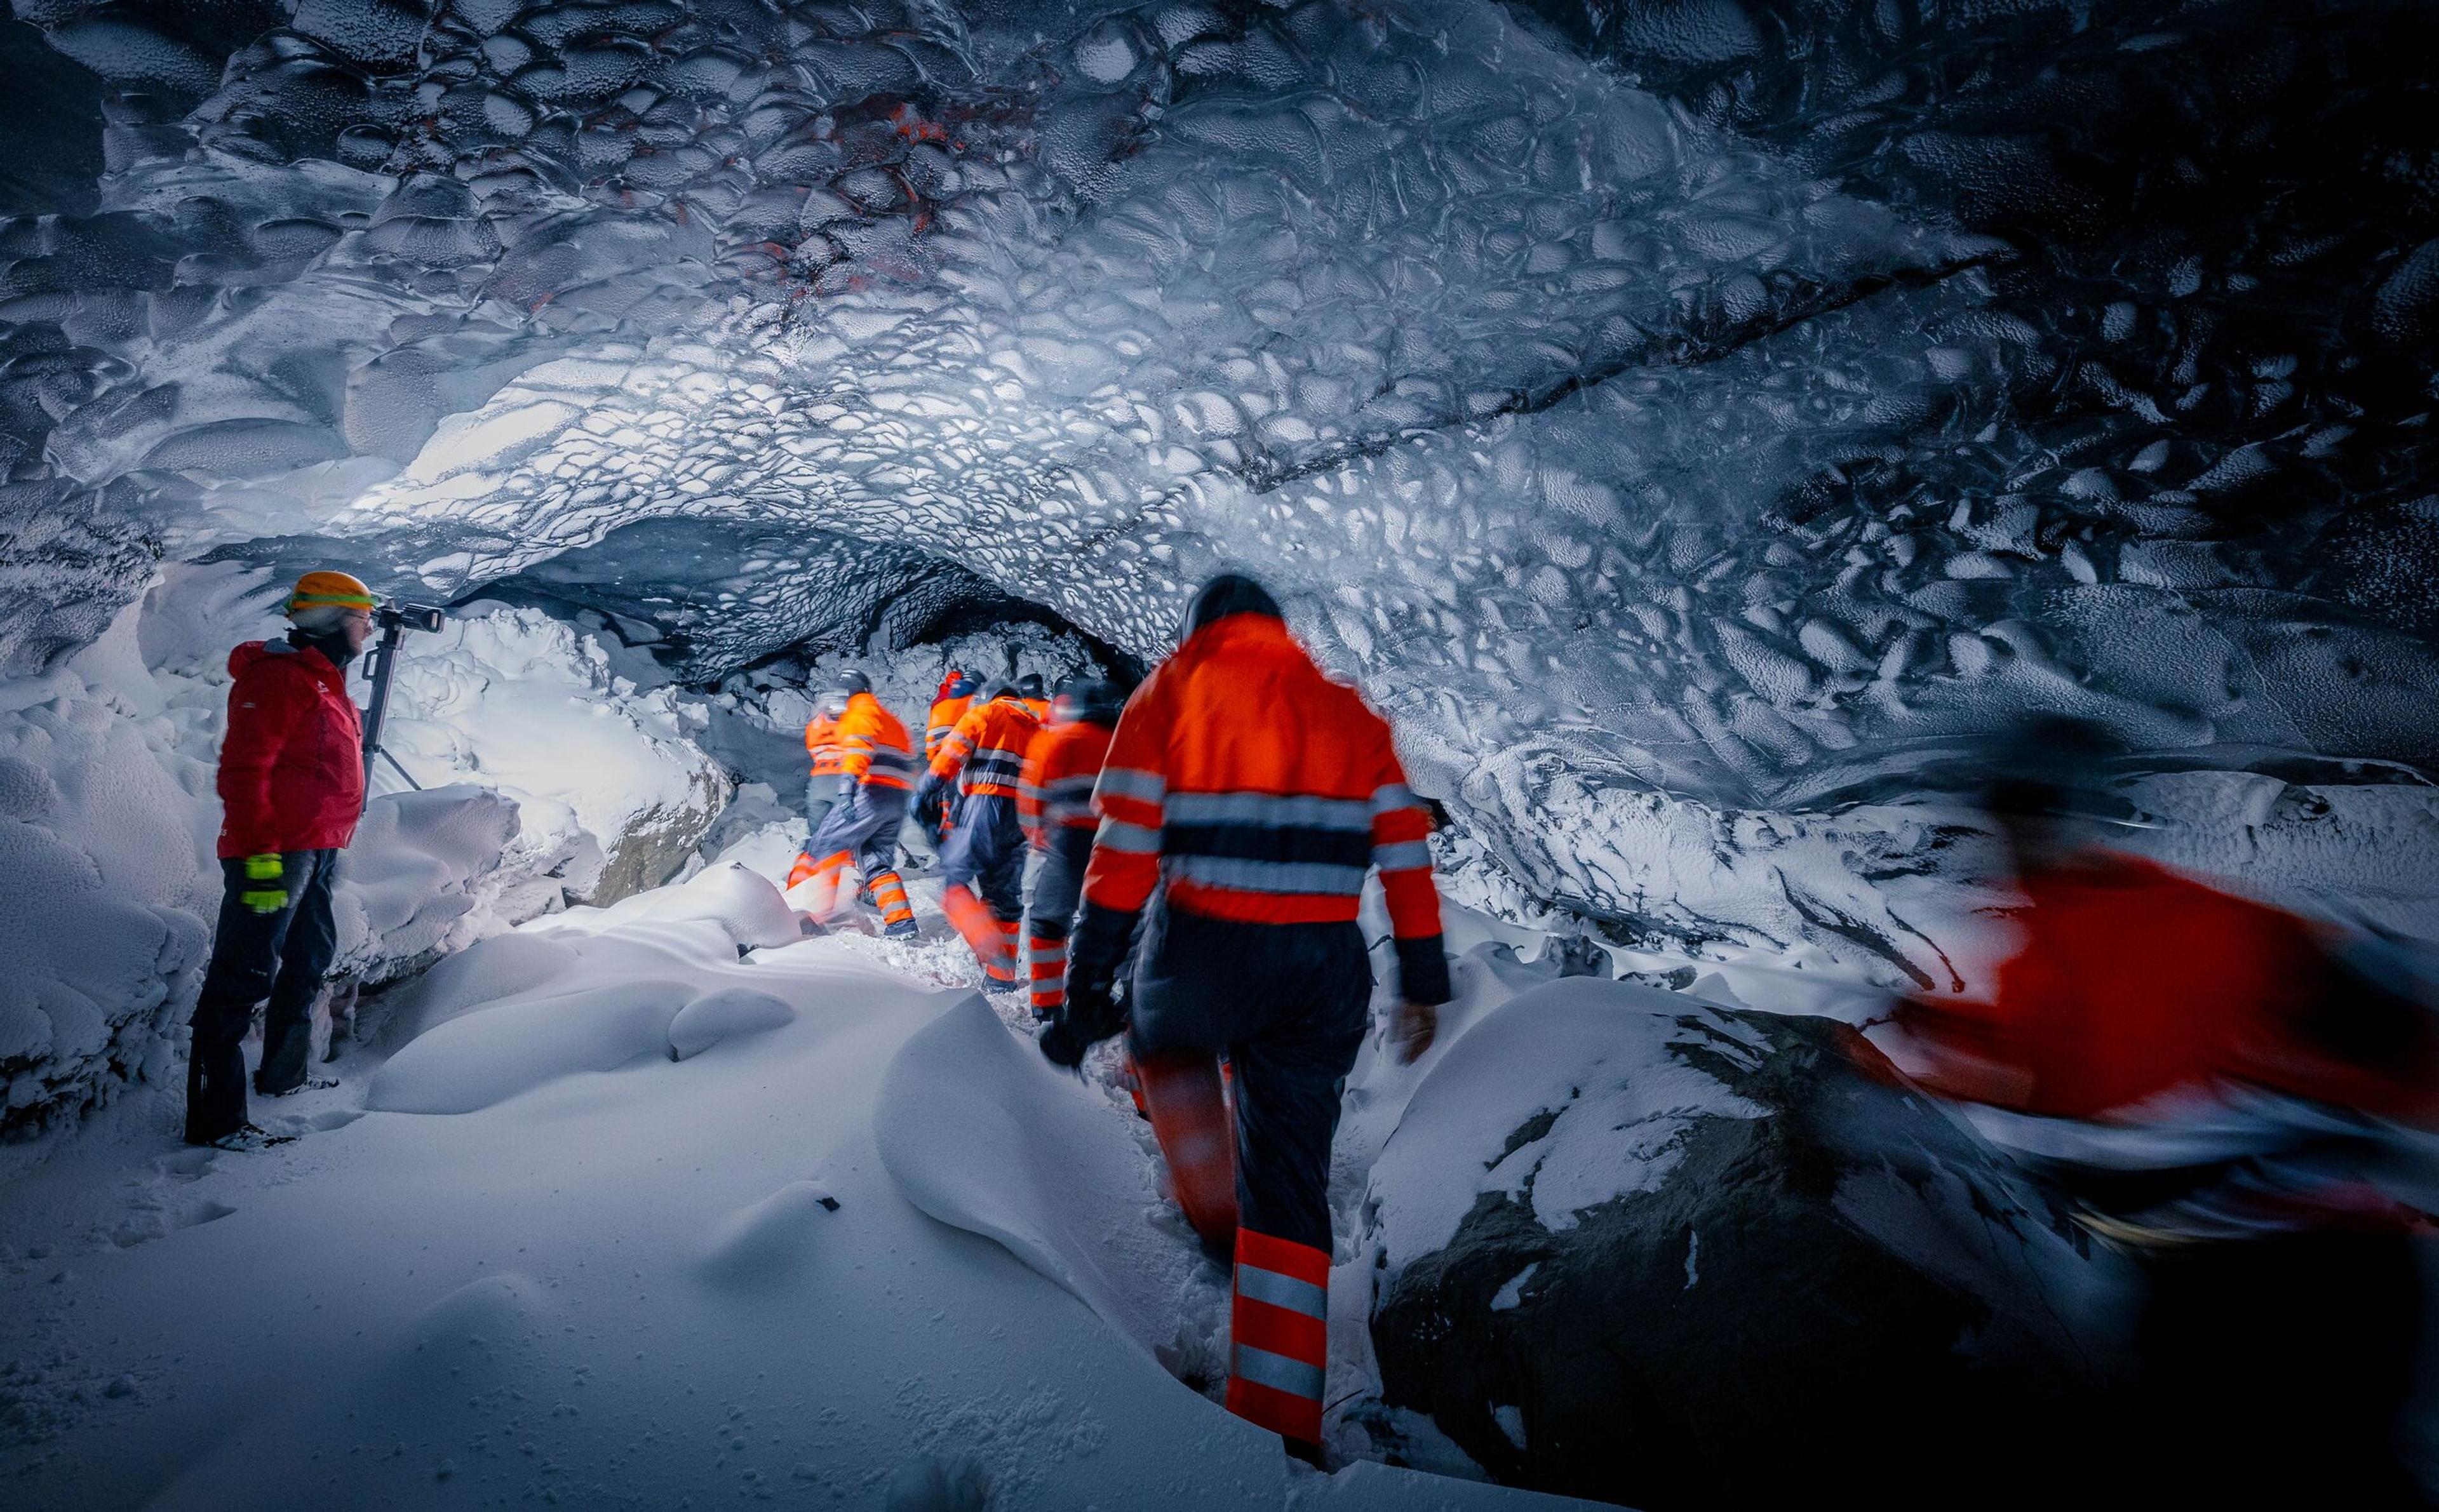 The image captures a group of explorers wearing high-visibility orange and red jackets with reflective stripes, navigating through a snow-filled ice cave